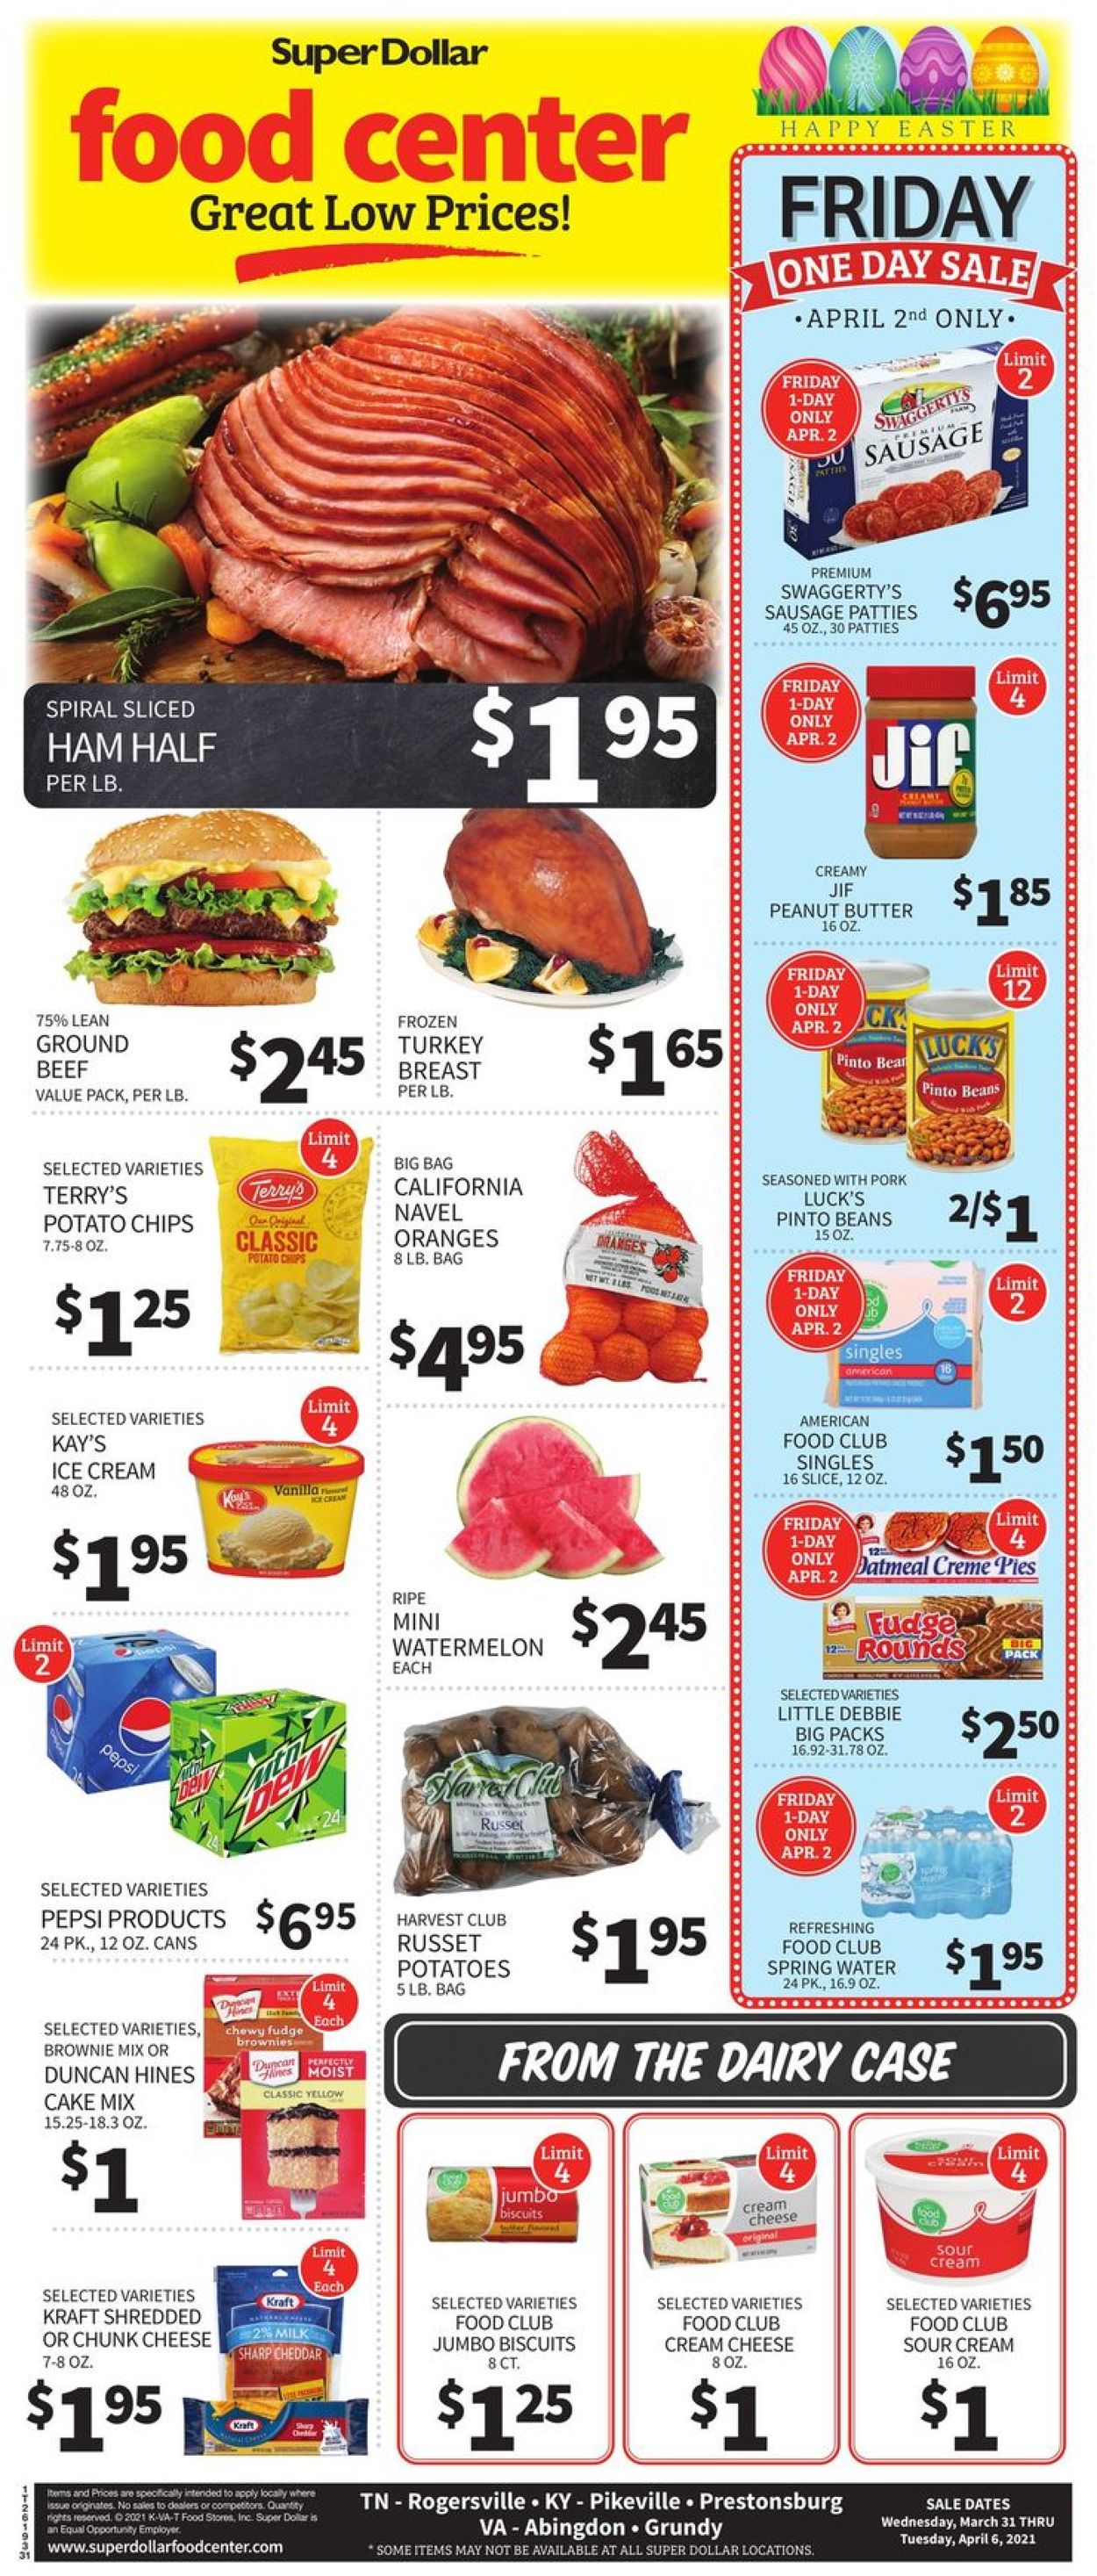 Catalogue Super Dollar Food Center Easter 2021 ad from 03/31/2021